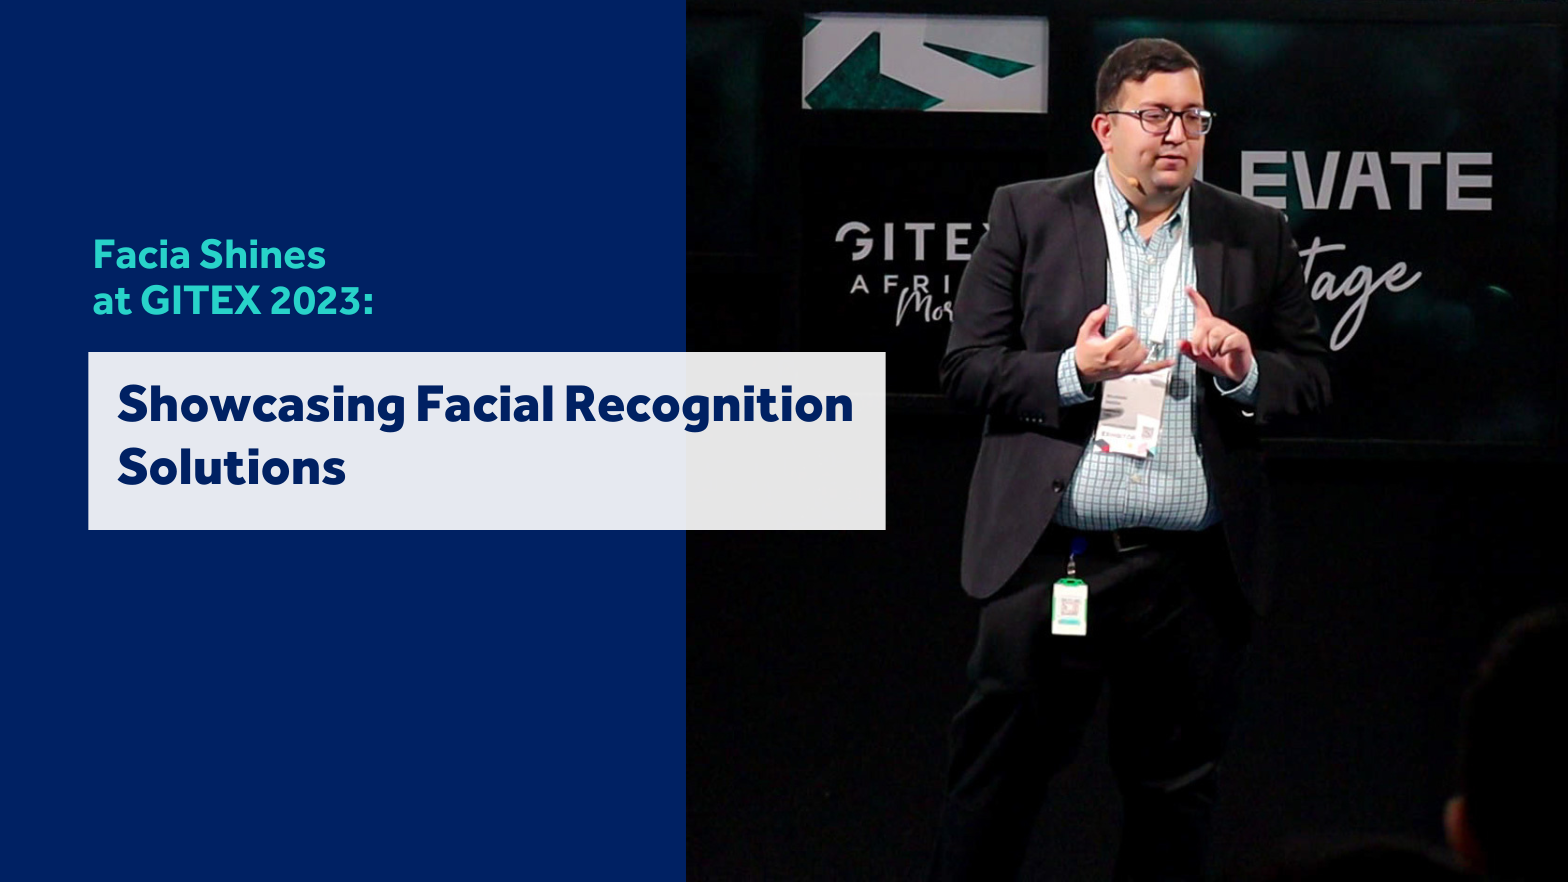 Mujadad Naeem, CEO of Facia, delivering a keynote speech at the Gitex conference, sharing insights on facial recognition technology and its impact on the industry